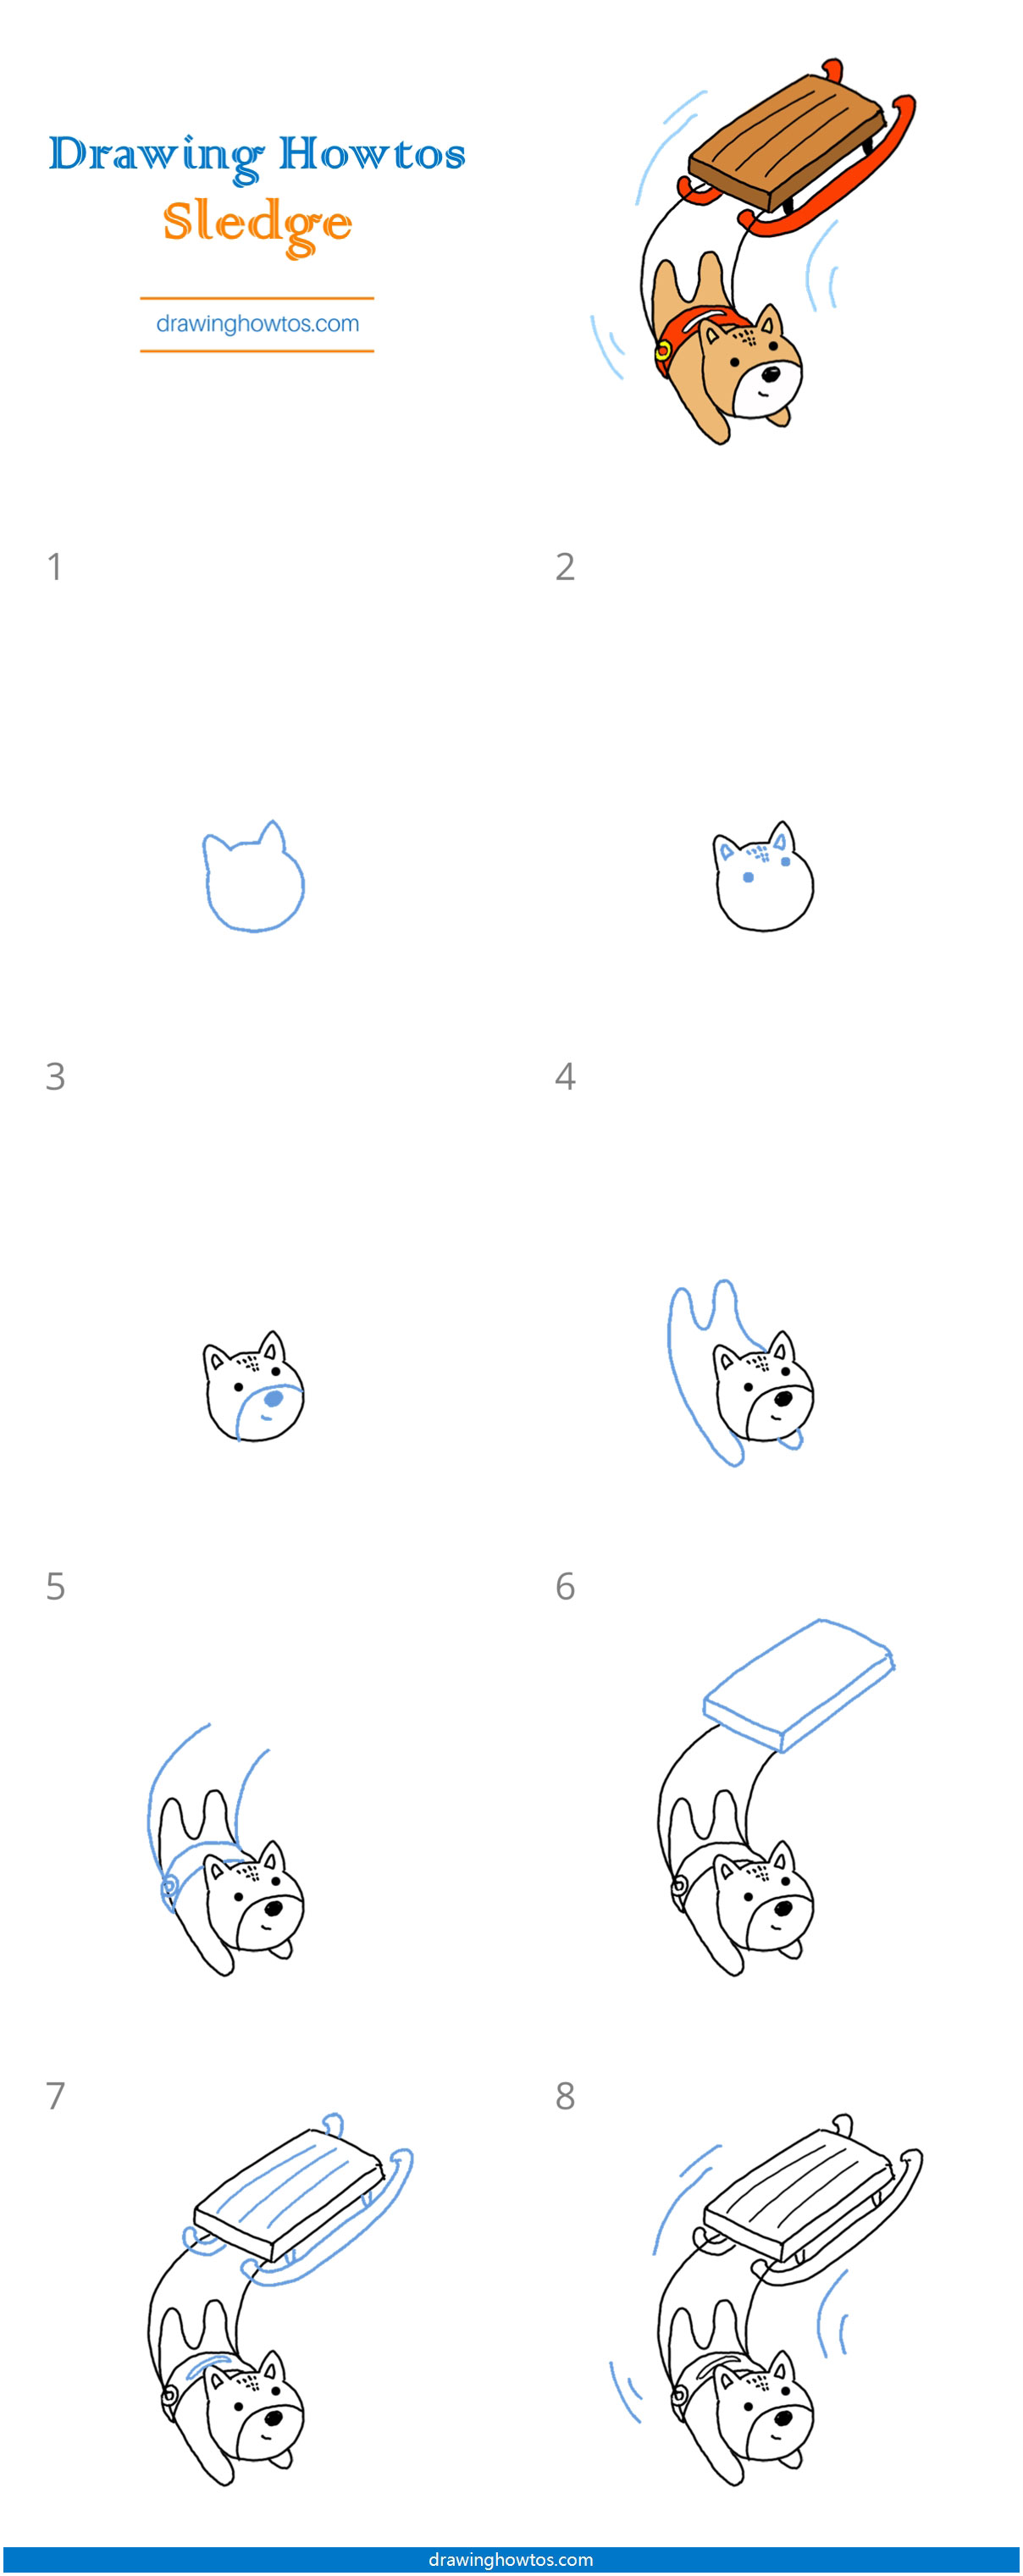 How to Draw Dog Sledding Step by Step